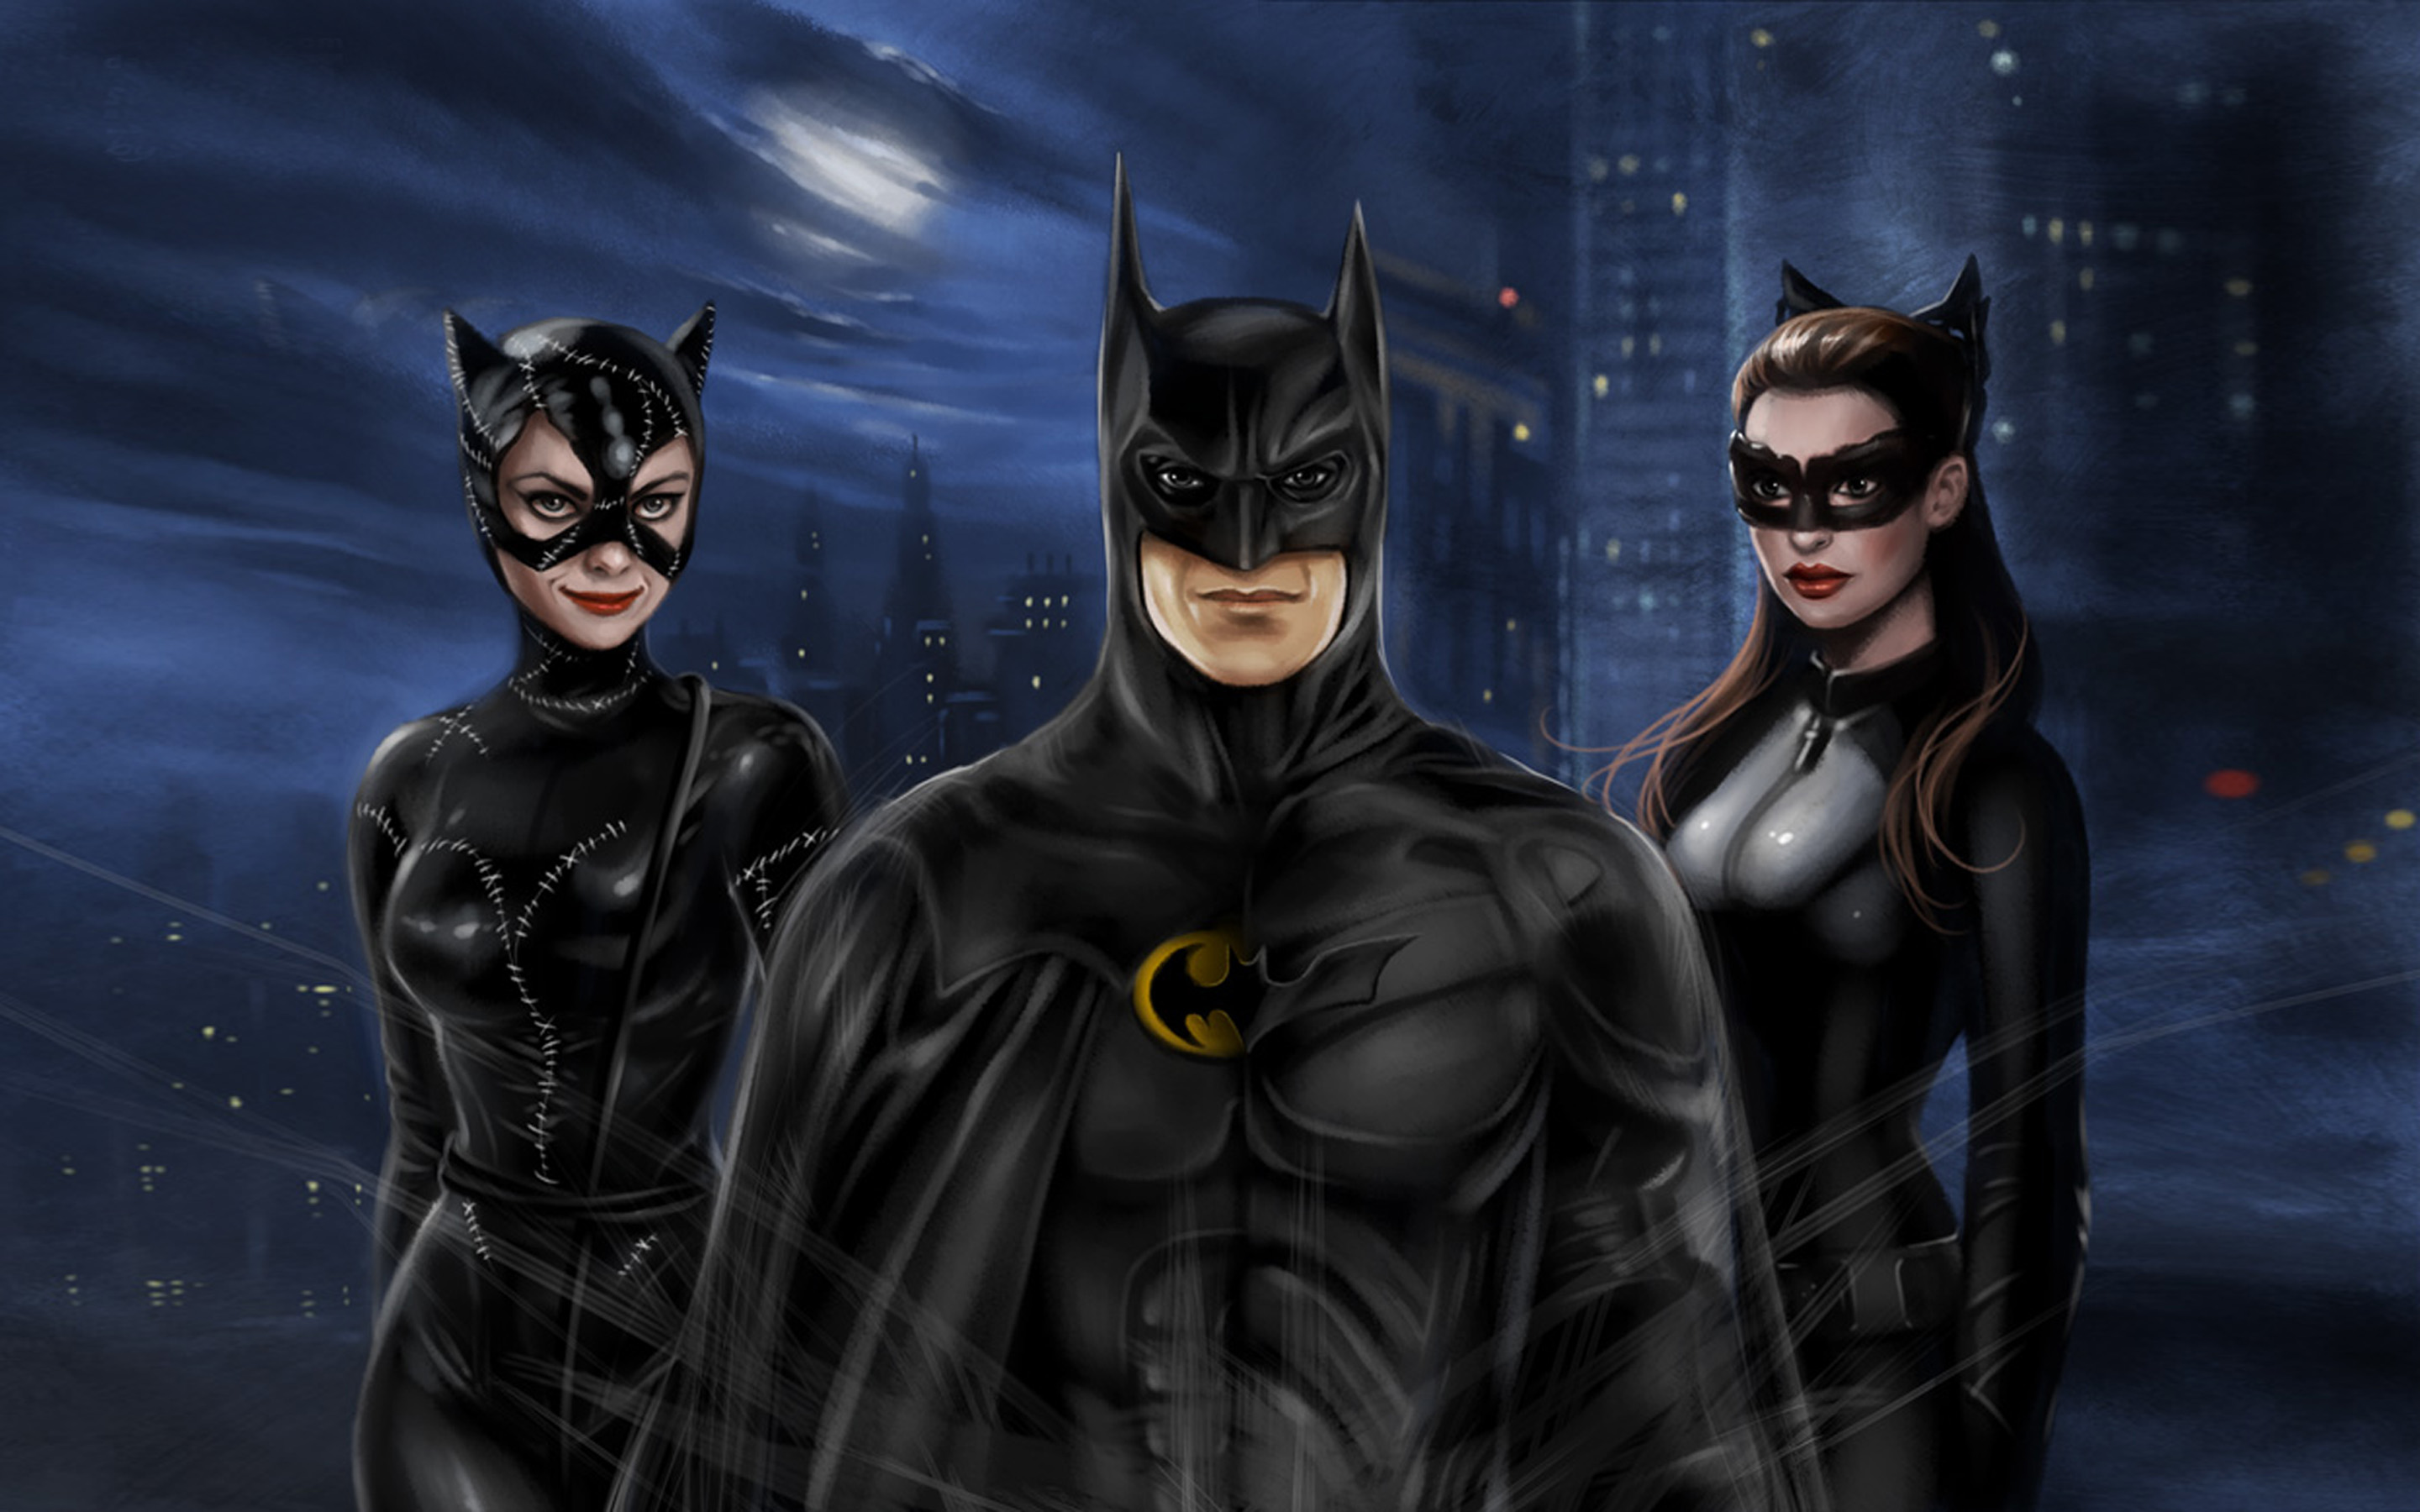 Batman And Catwomen Wallpapers For Laptop-HD Widescreen Free Download.